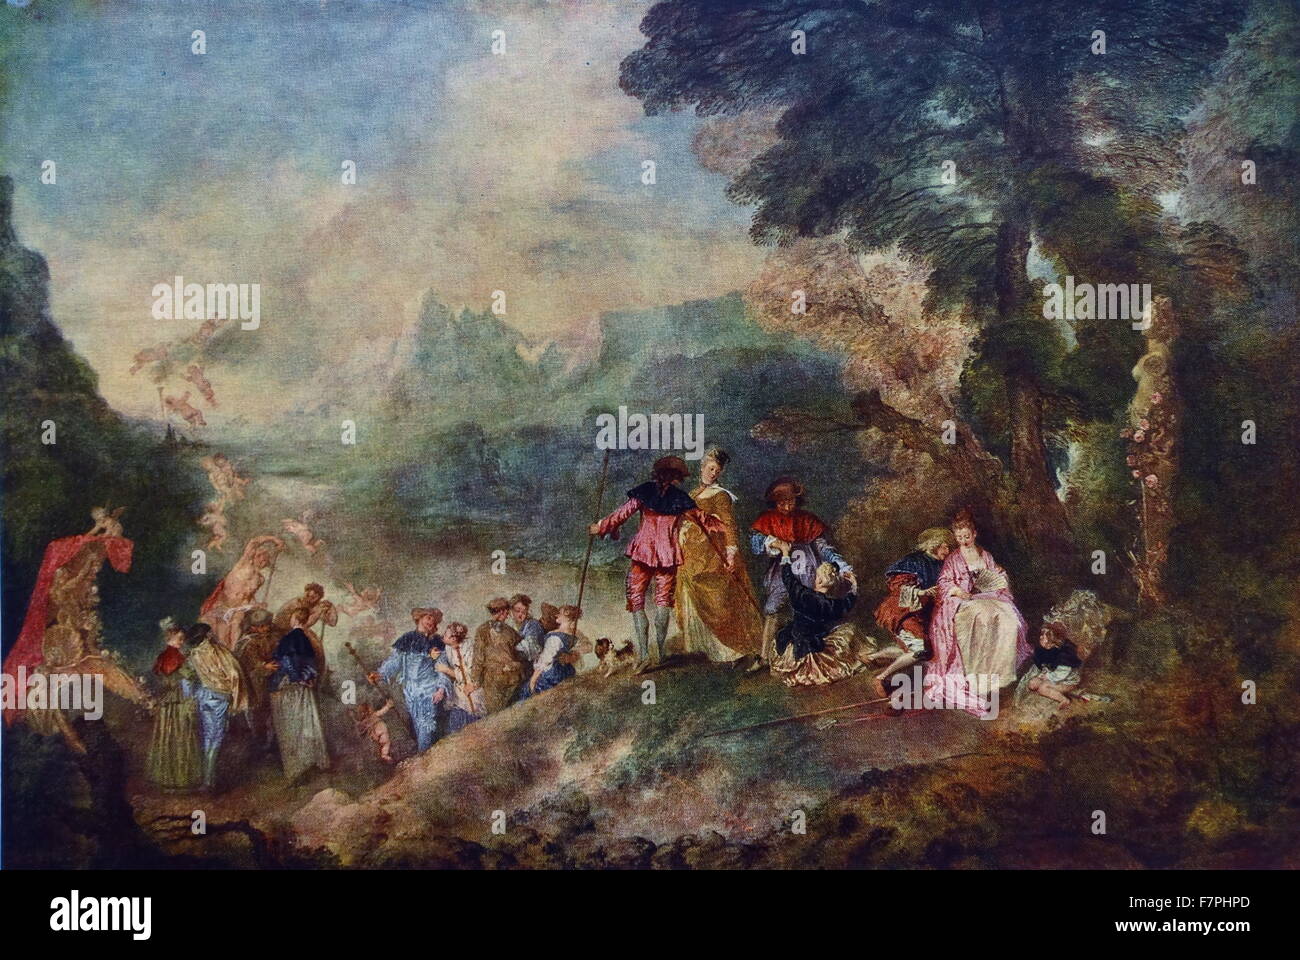 Painting titled 'Embarkation for Cythera' by Jean-Antoine Watteau (1684-1721) French painter. Dated 18th Century Stock Photo